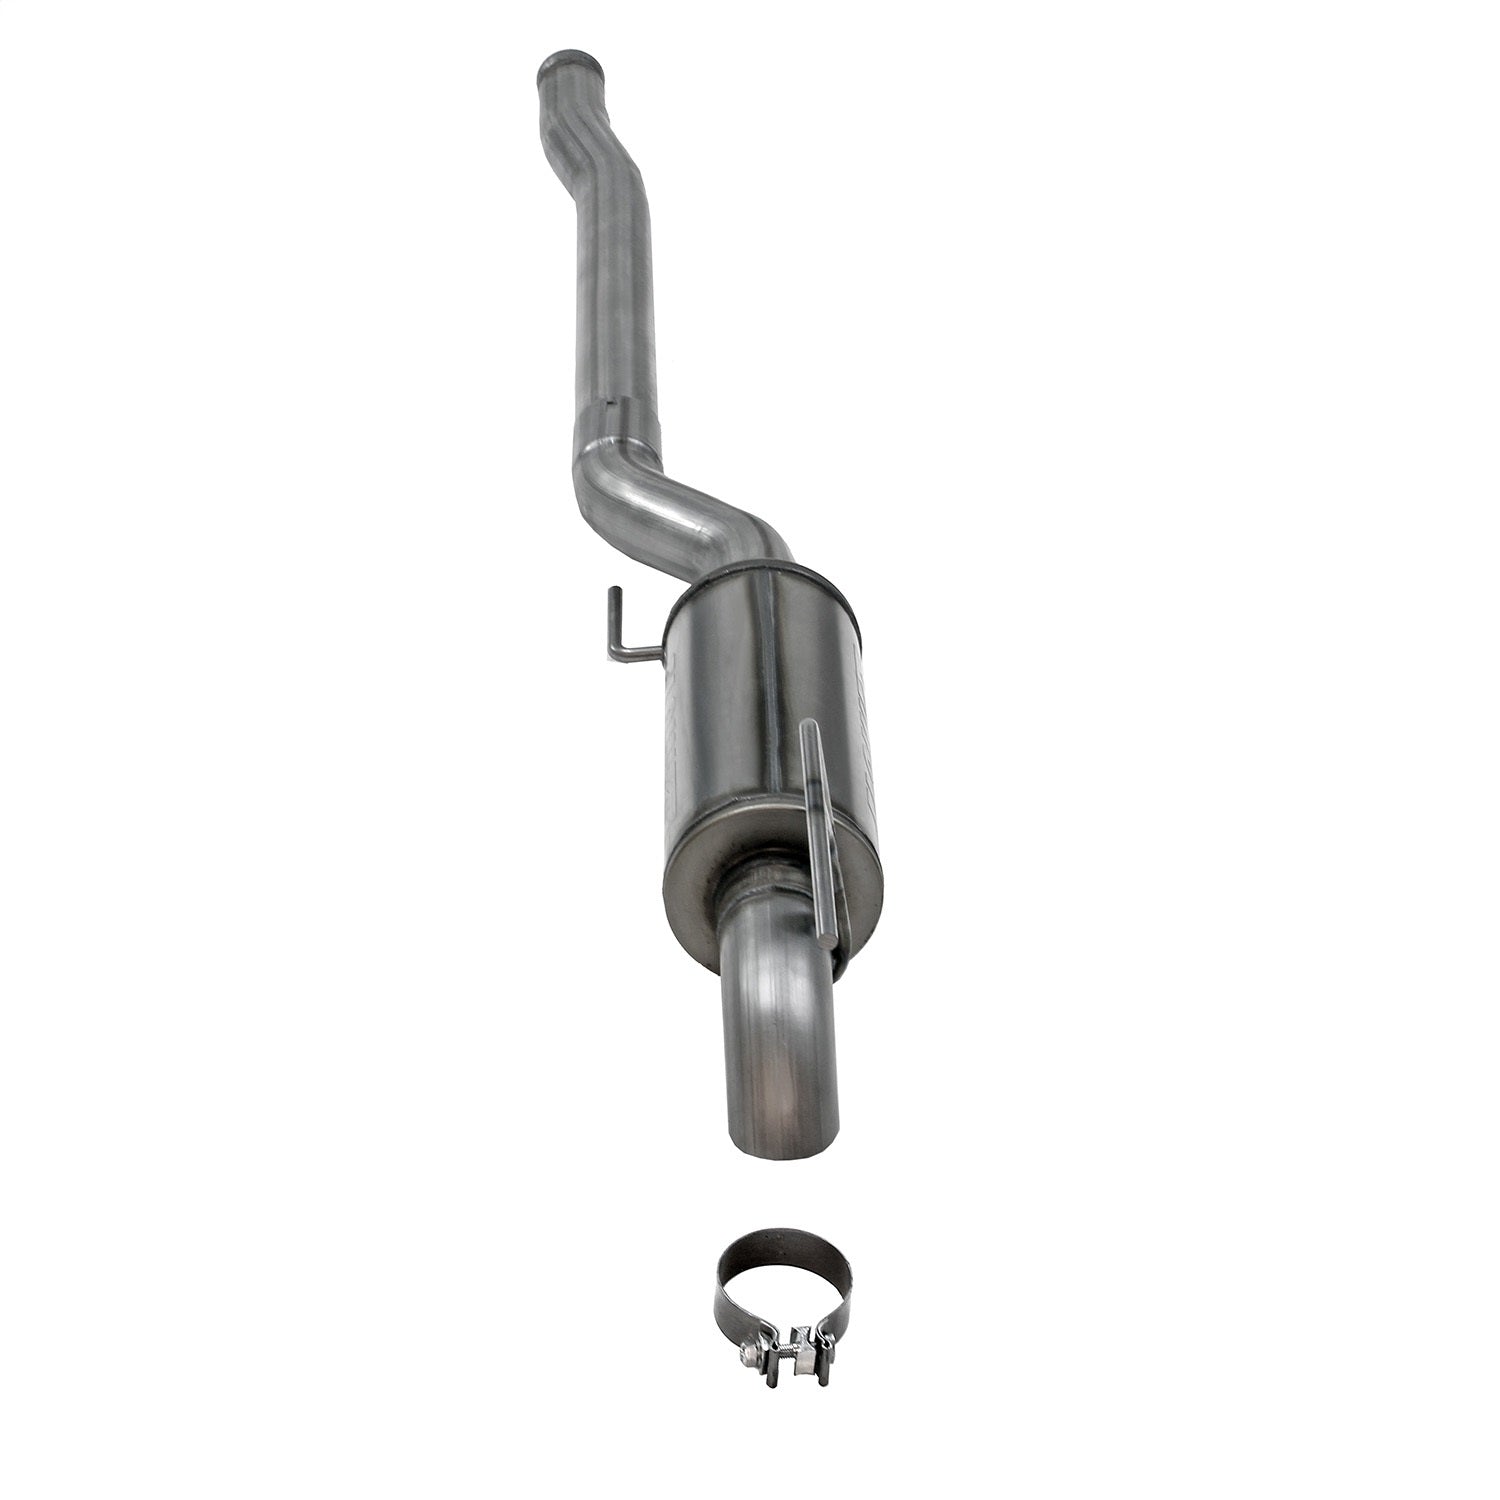 Flowmaster 717969 FlowFX Extreme Cat-Back Exhaust System Fits 20-21 Gladiator